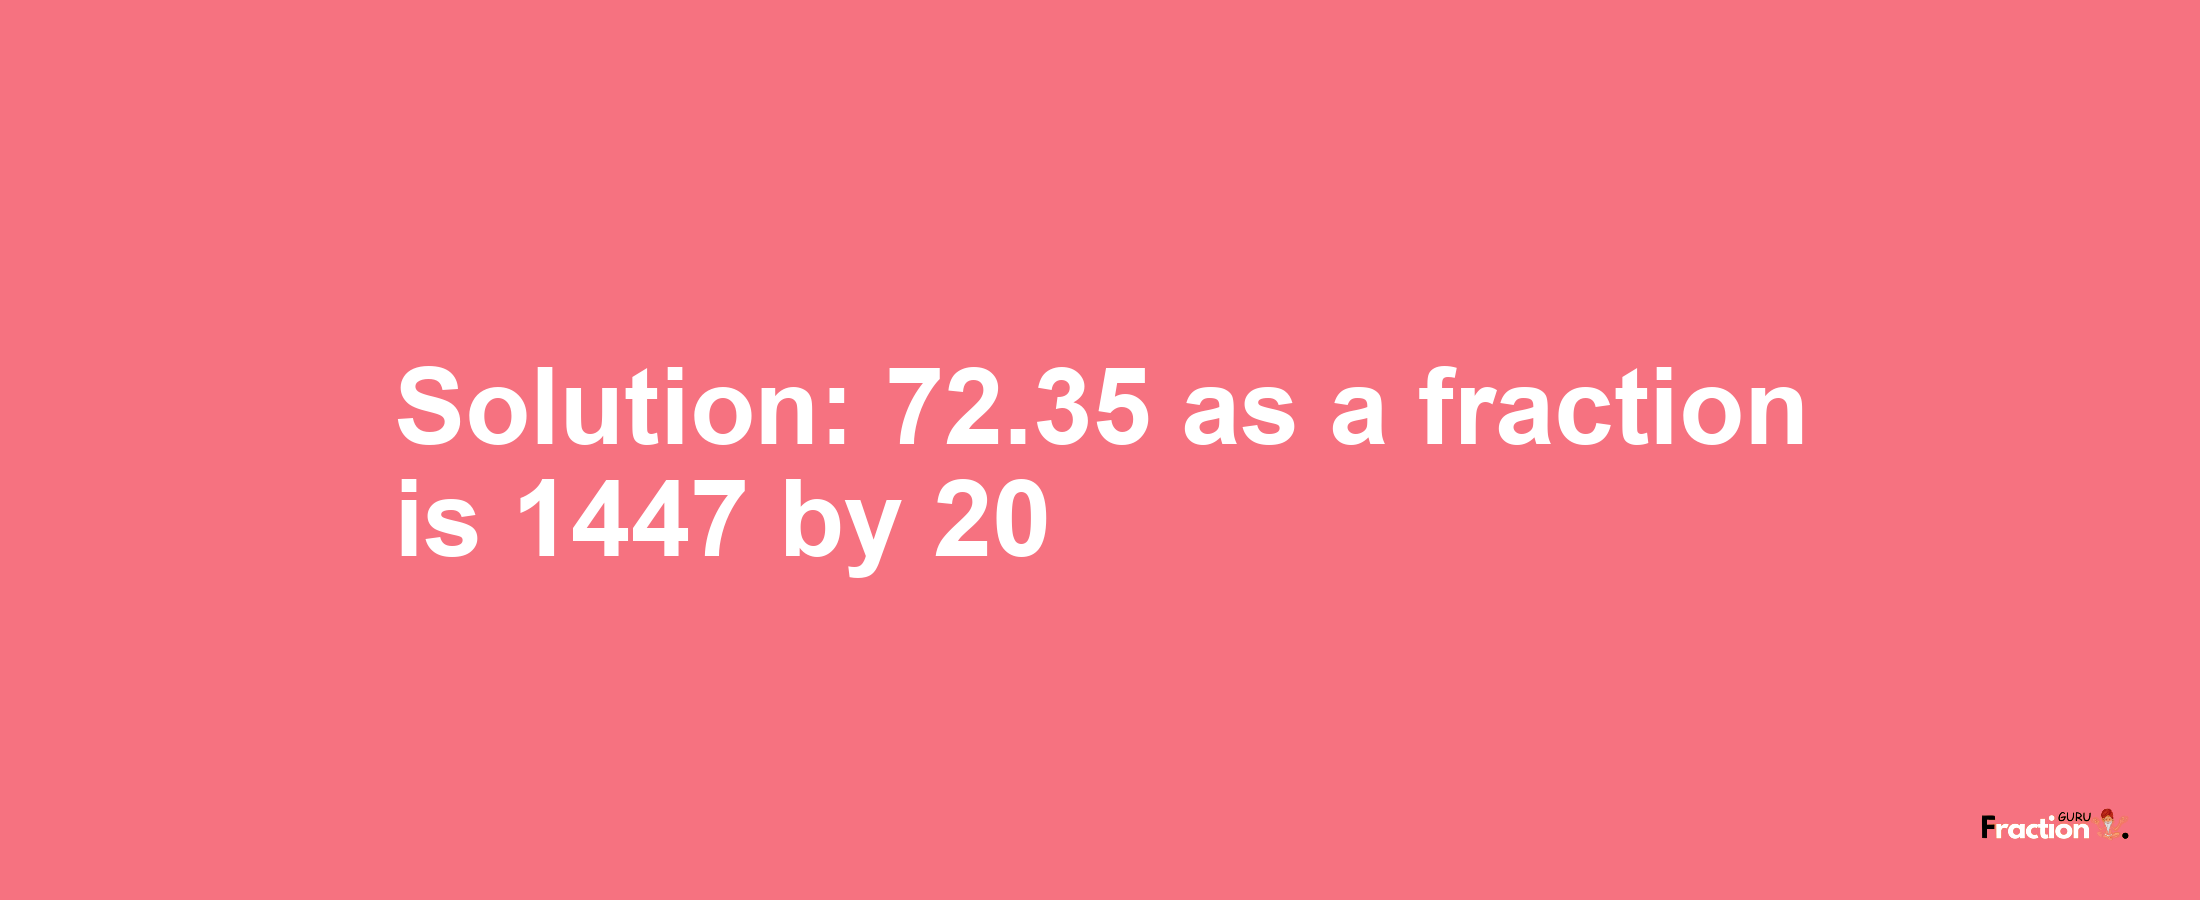 Solution:72.35 as a fraction is 1447/20